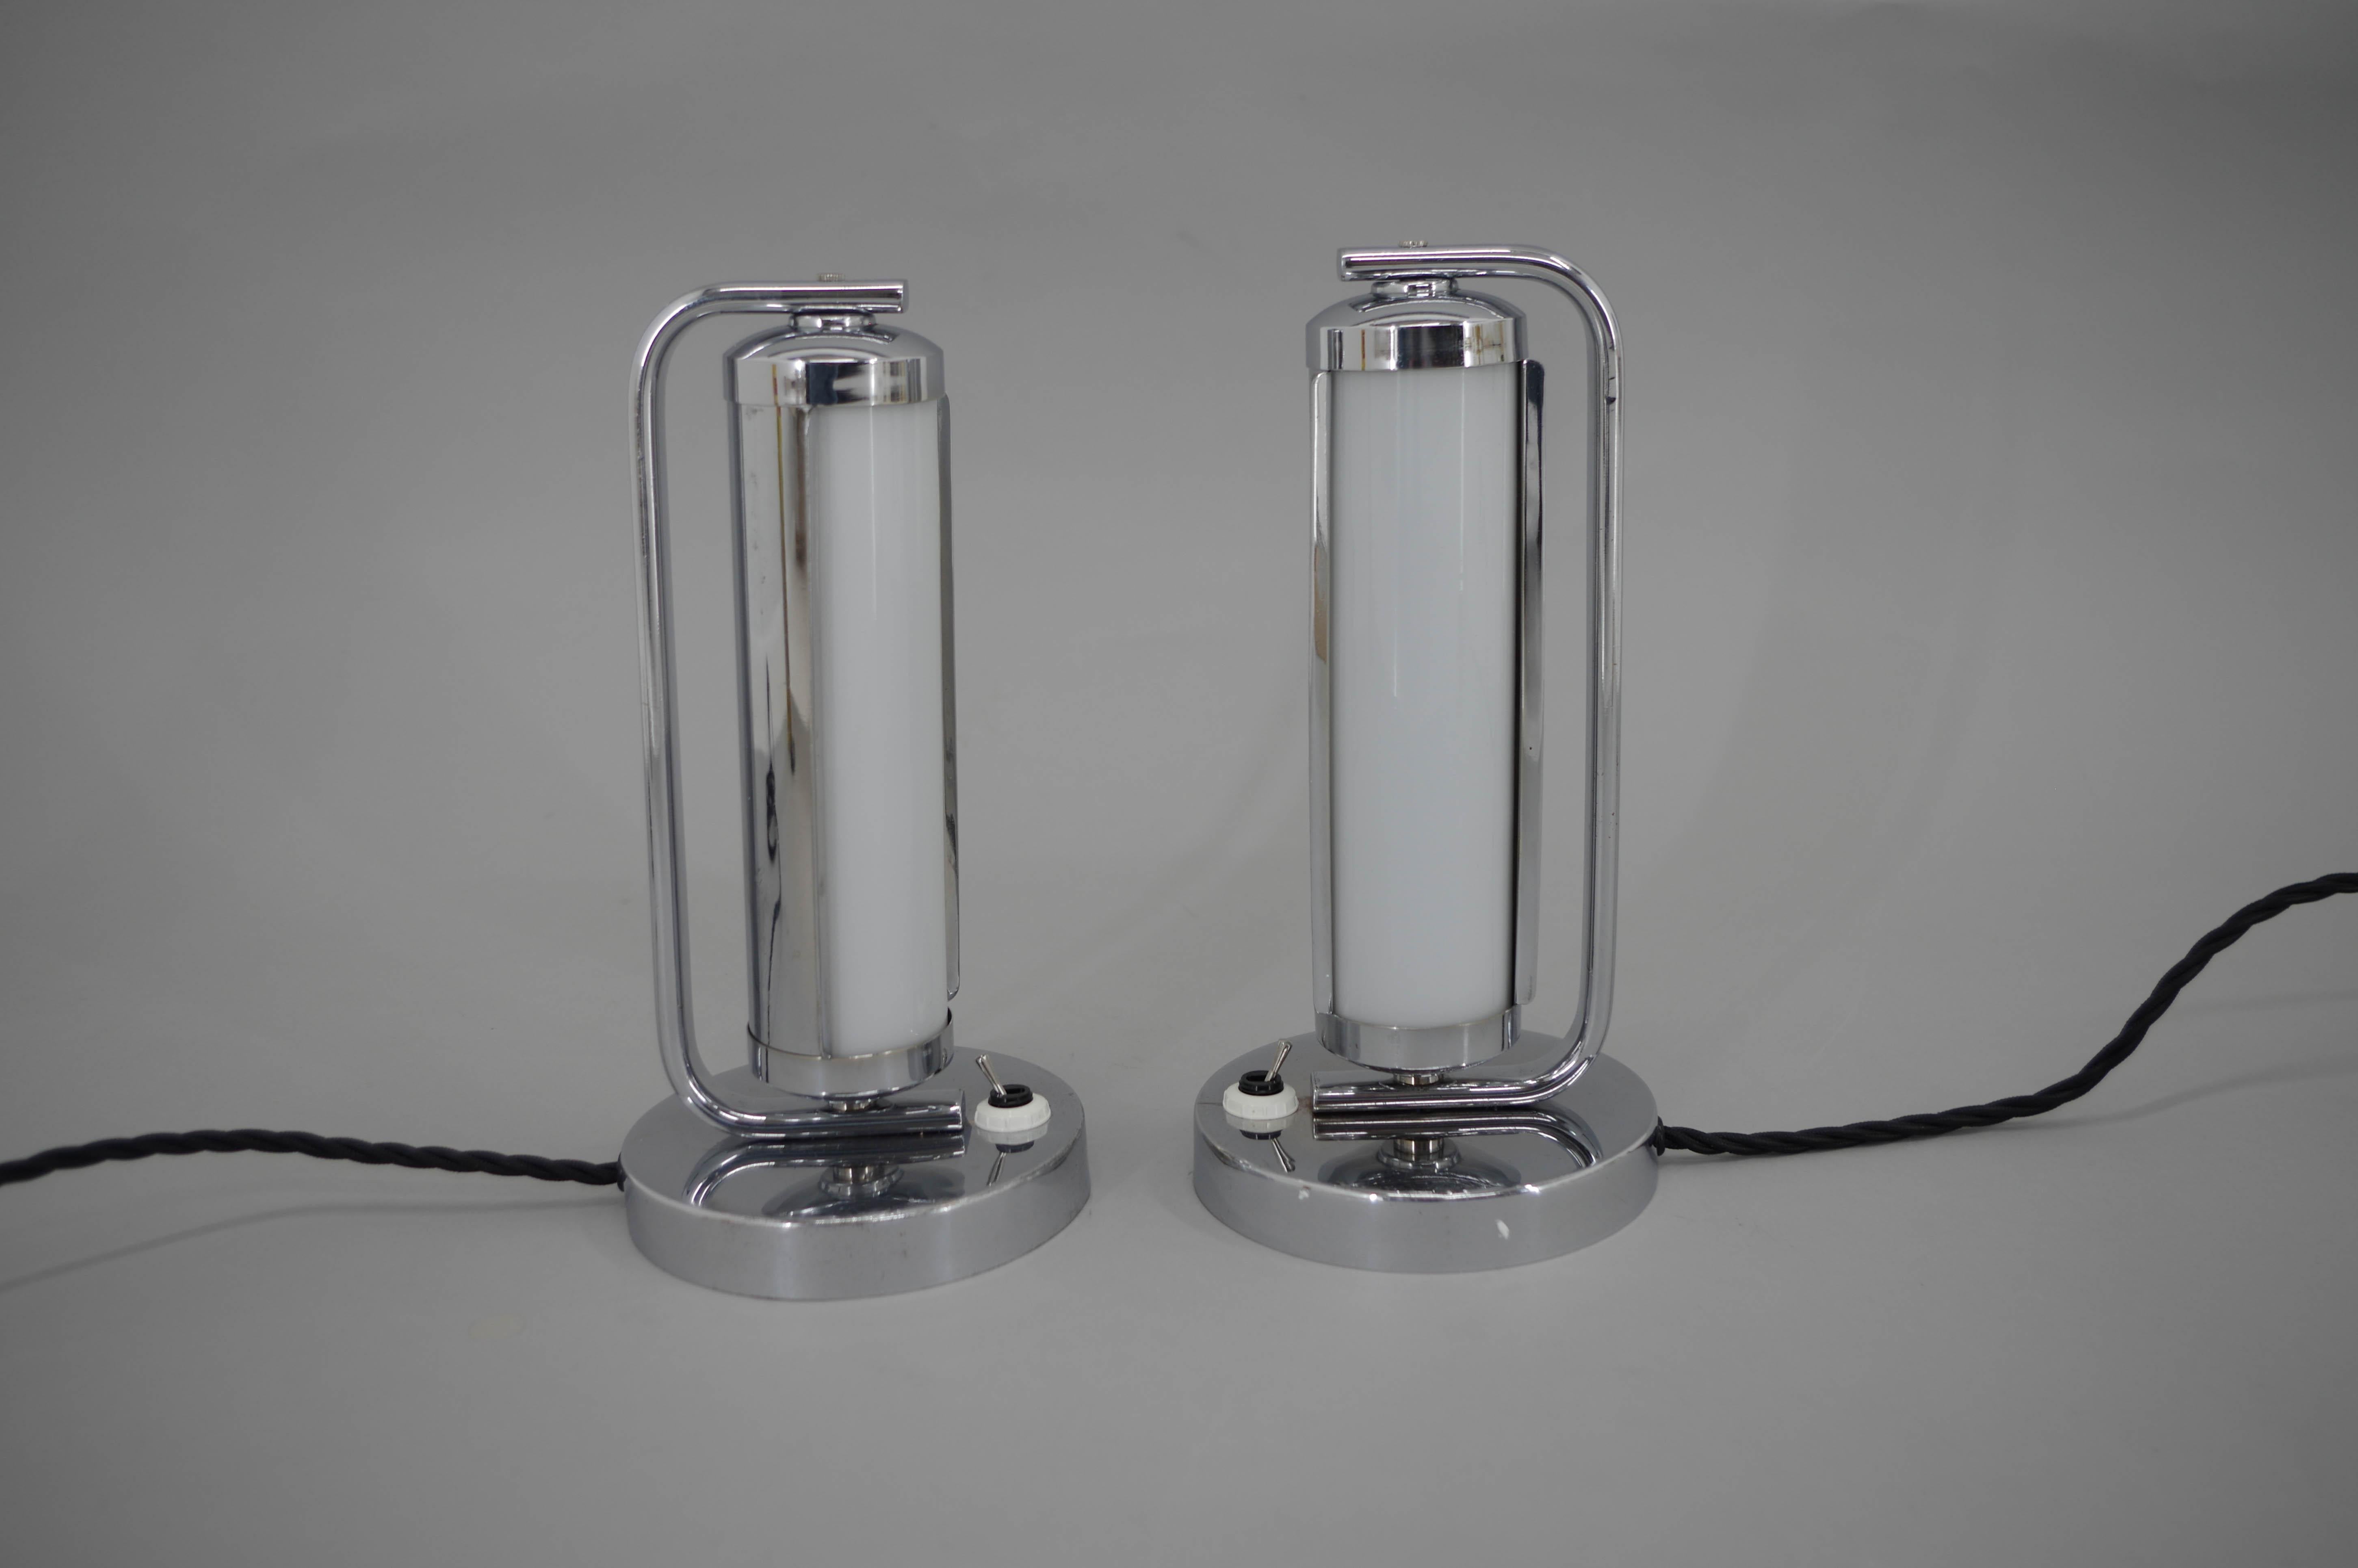 Two Art Deco/Functionalist table lamps with tubular glass and rotating chrome cover.
Restored, cleaned, polished, rewired
1x40W, E12-E14 bulb
US plug adapter included